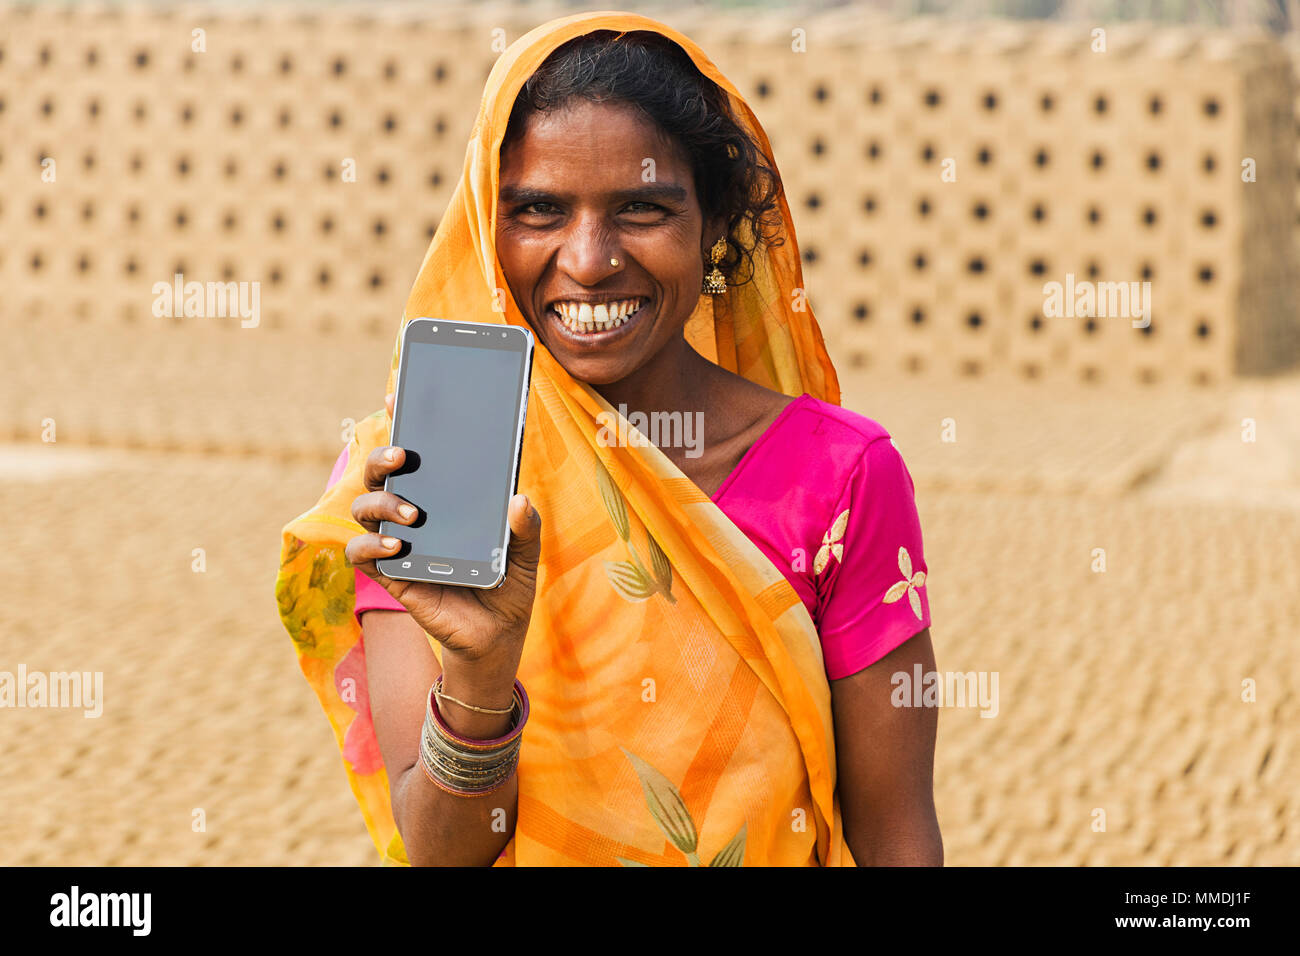 One Rural Female Factory Worker Showing Smartphone In-Brick Factory Village Stock Photo